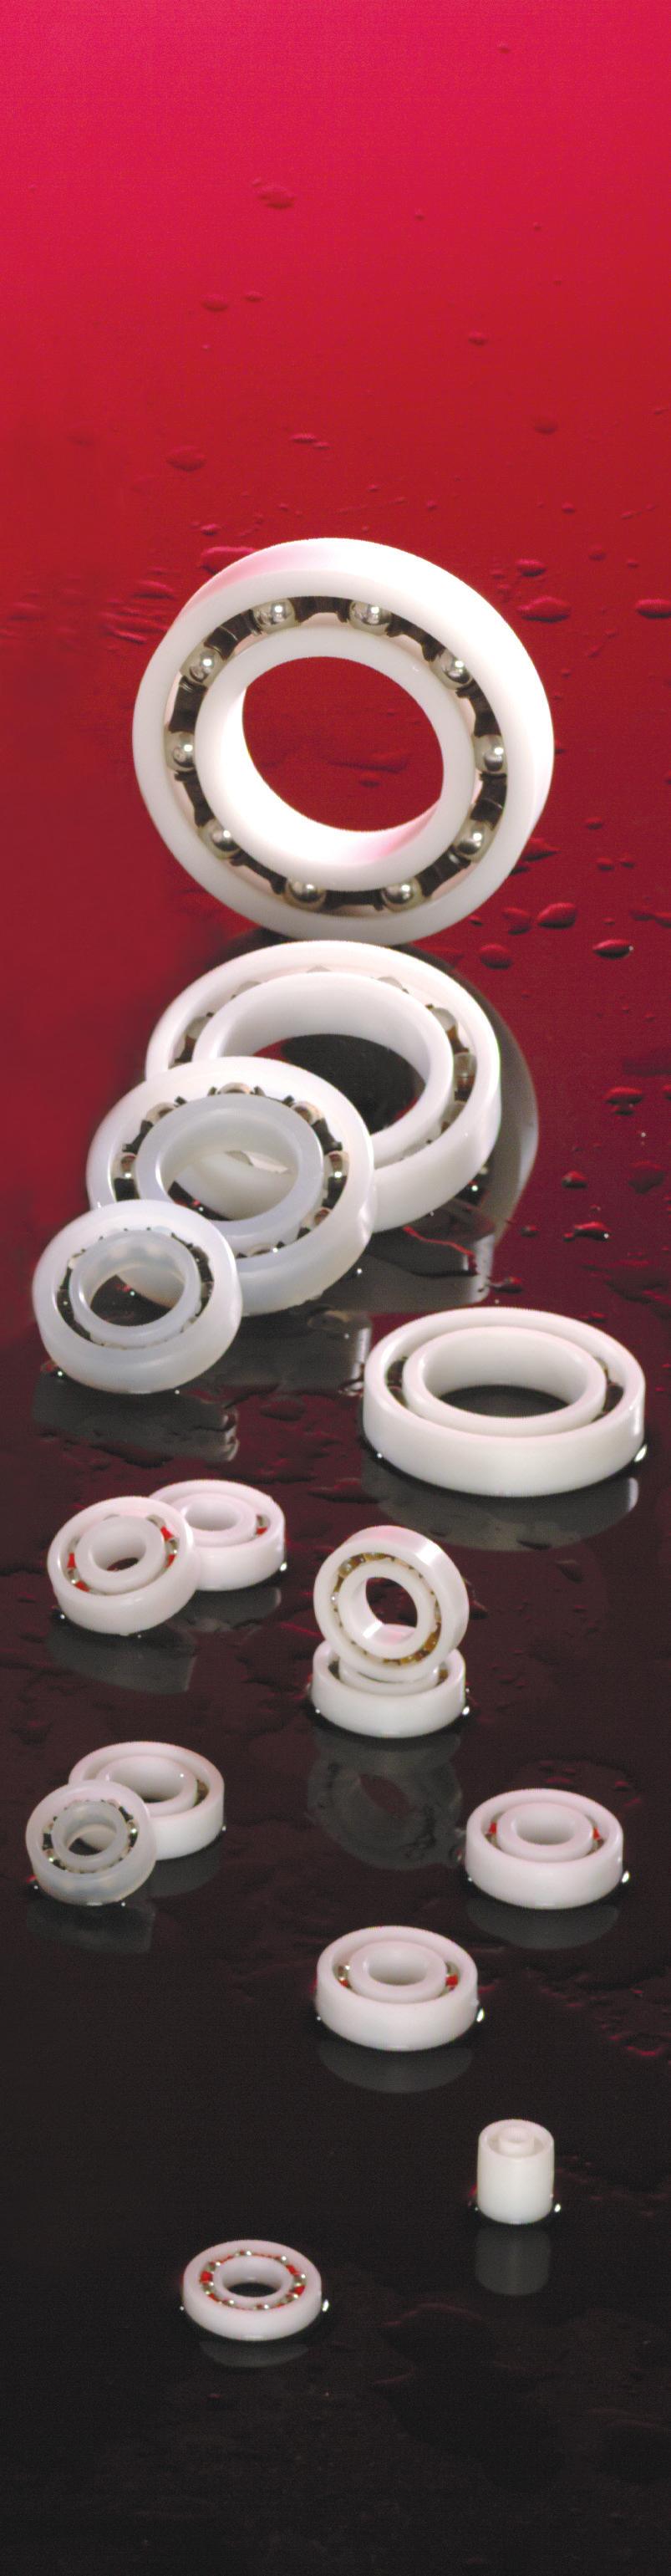 Plastic bearings that revolve around your needs We go to extremes to make things move.